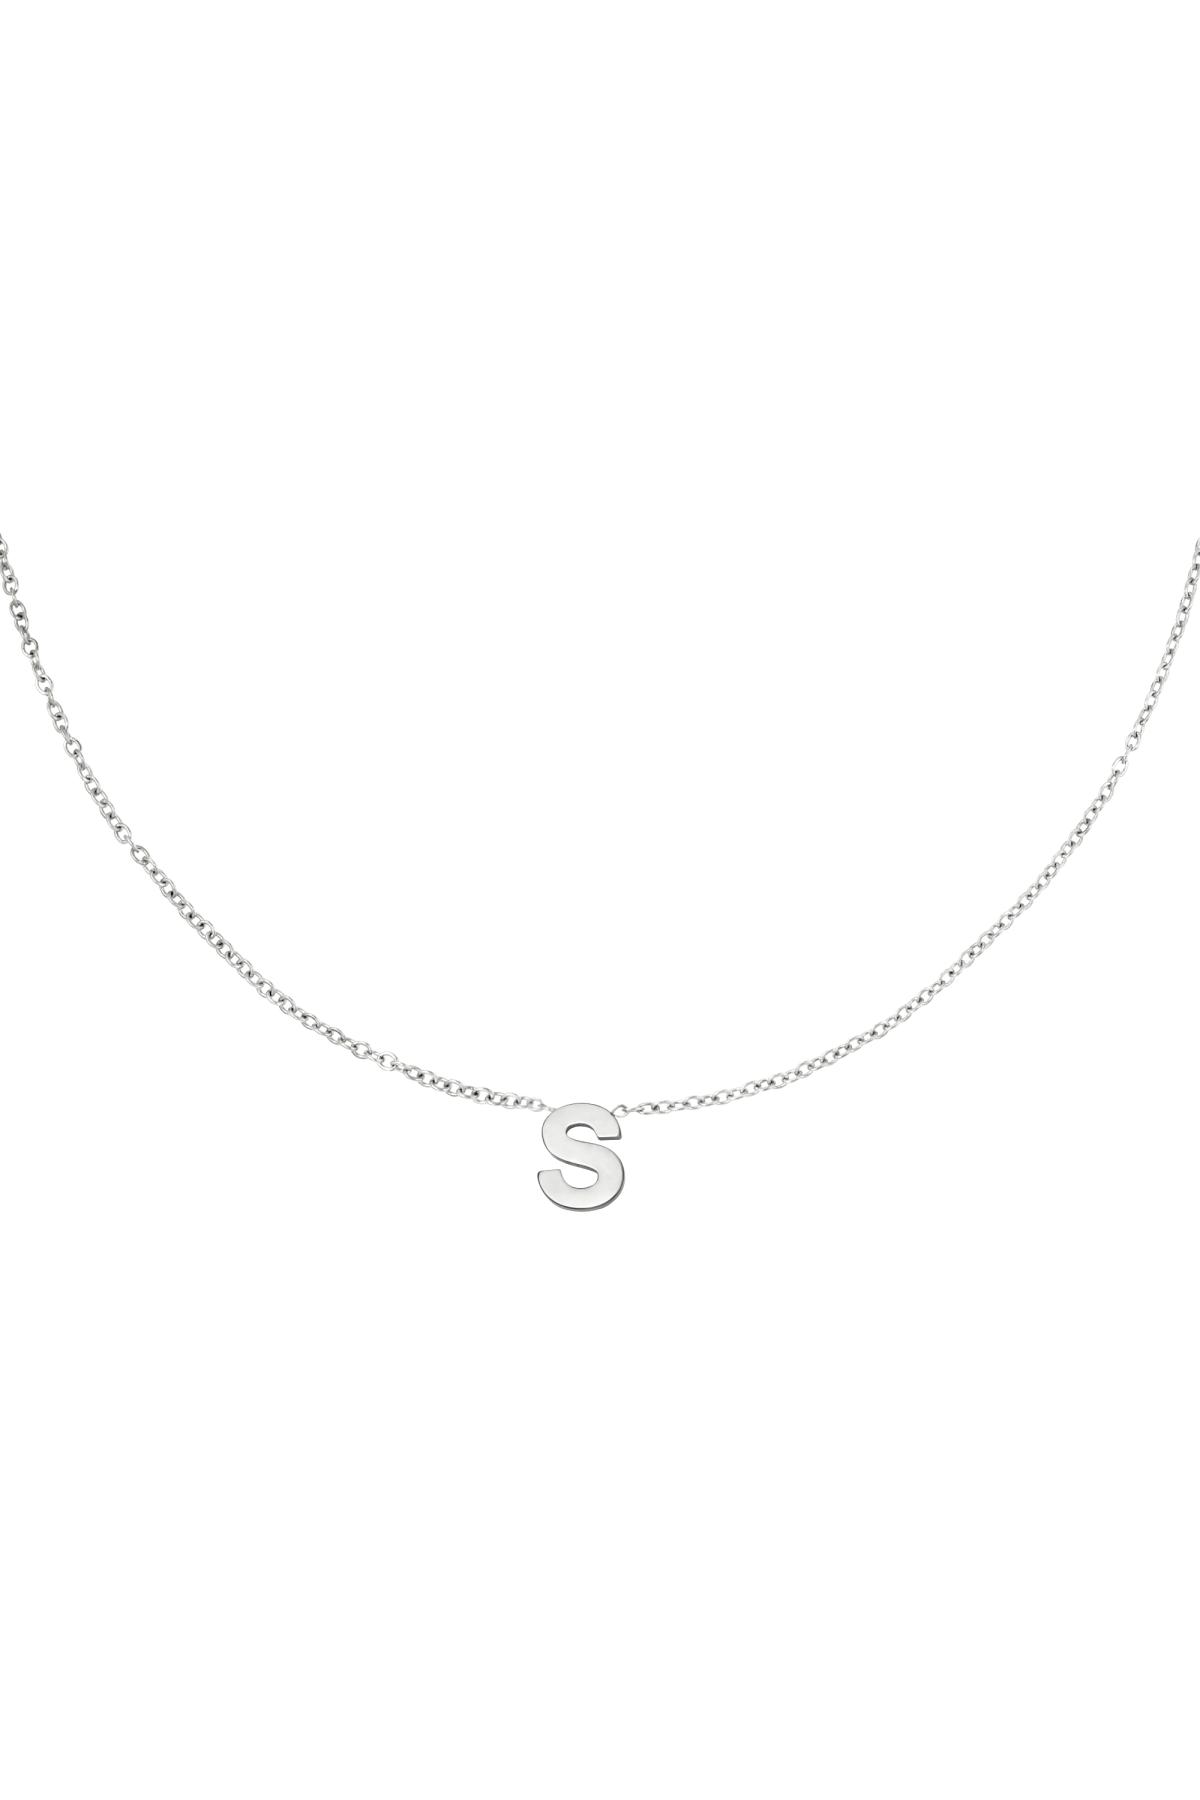 Silver / Stainless steel necklace initial S Silver Picture17